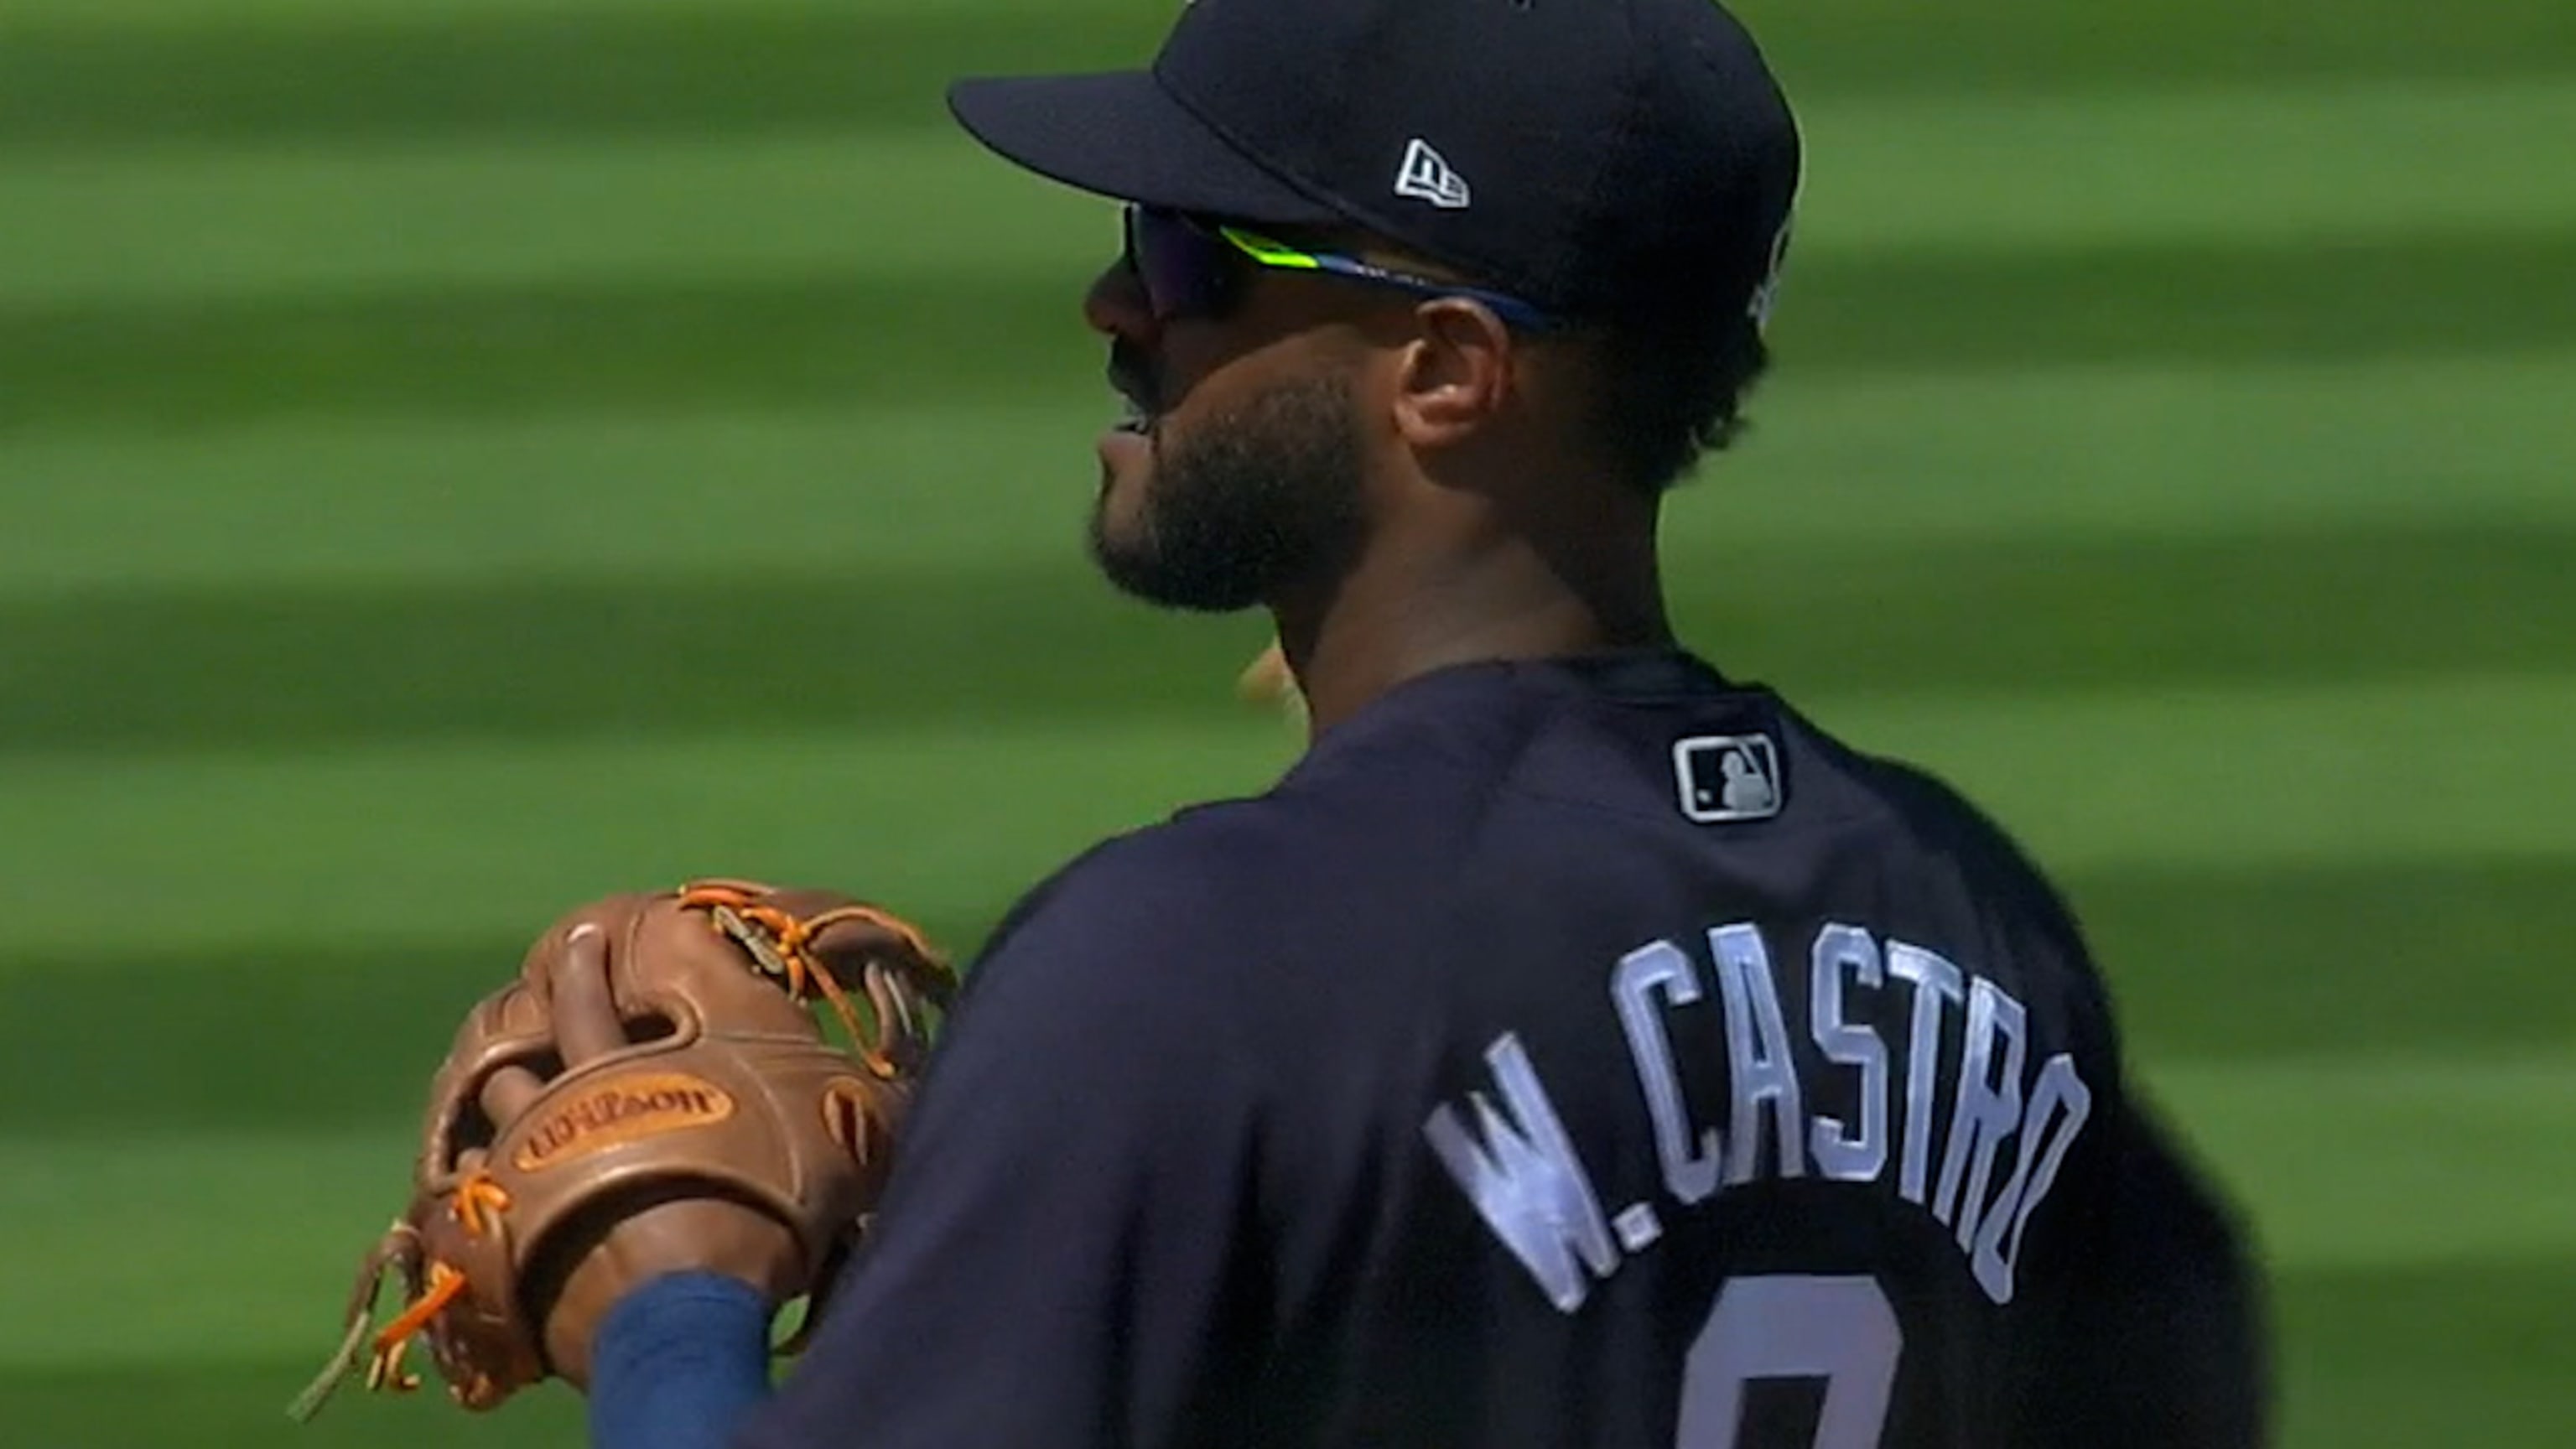 Willi Castro Opening Day against Indians